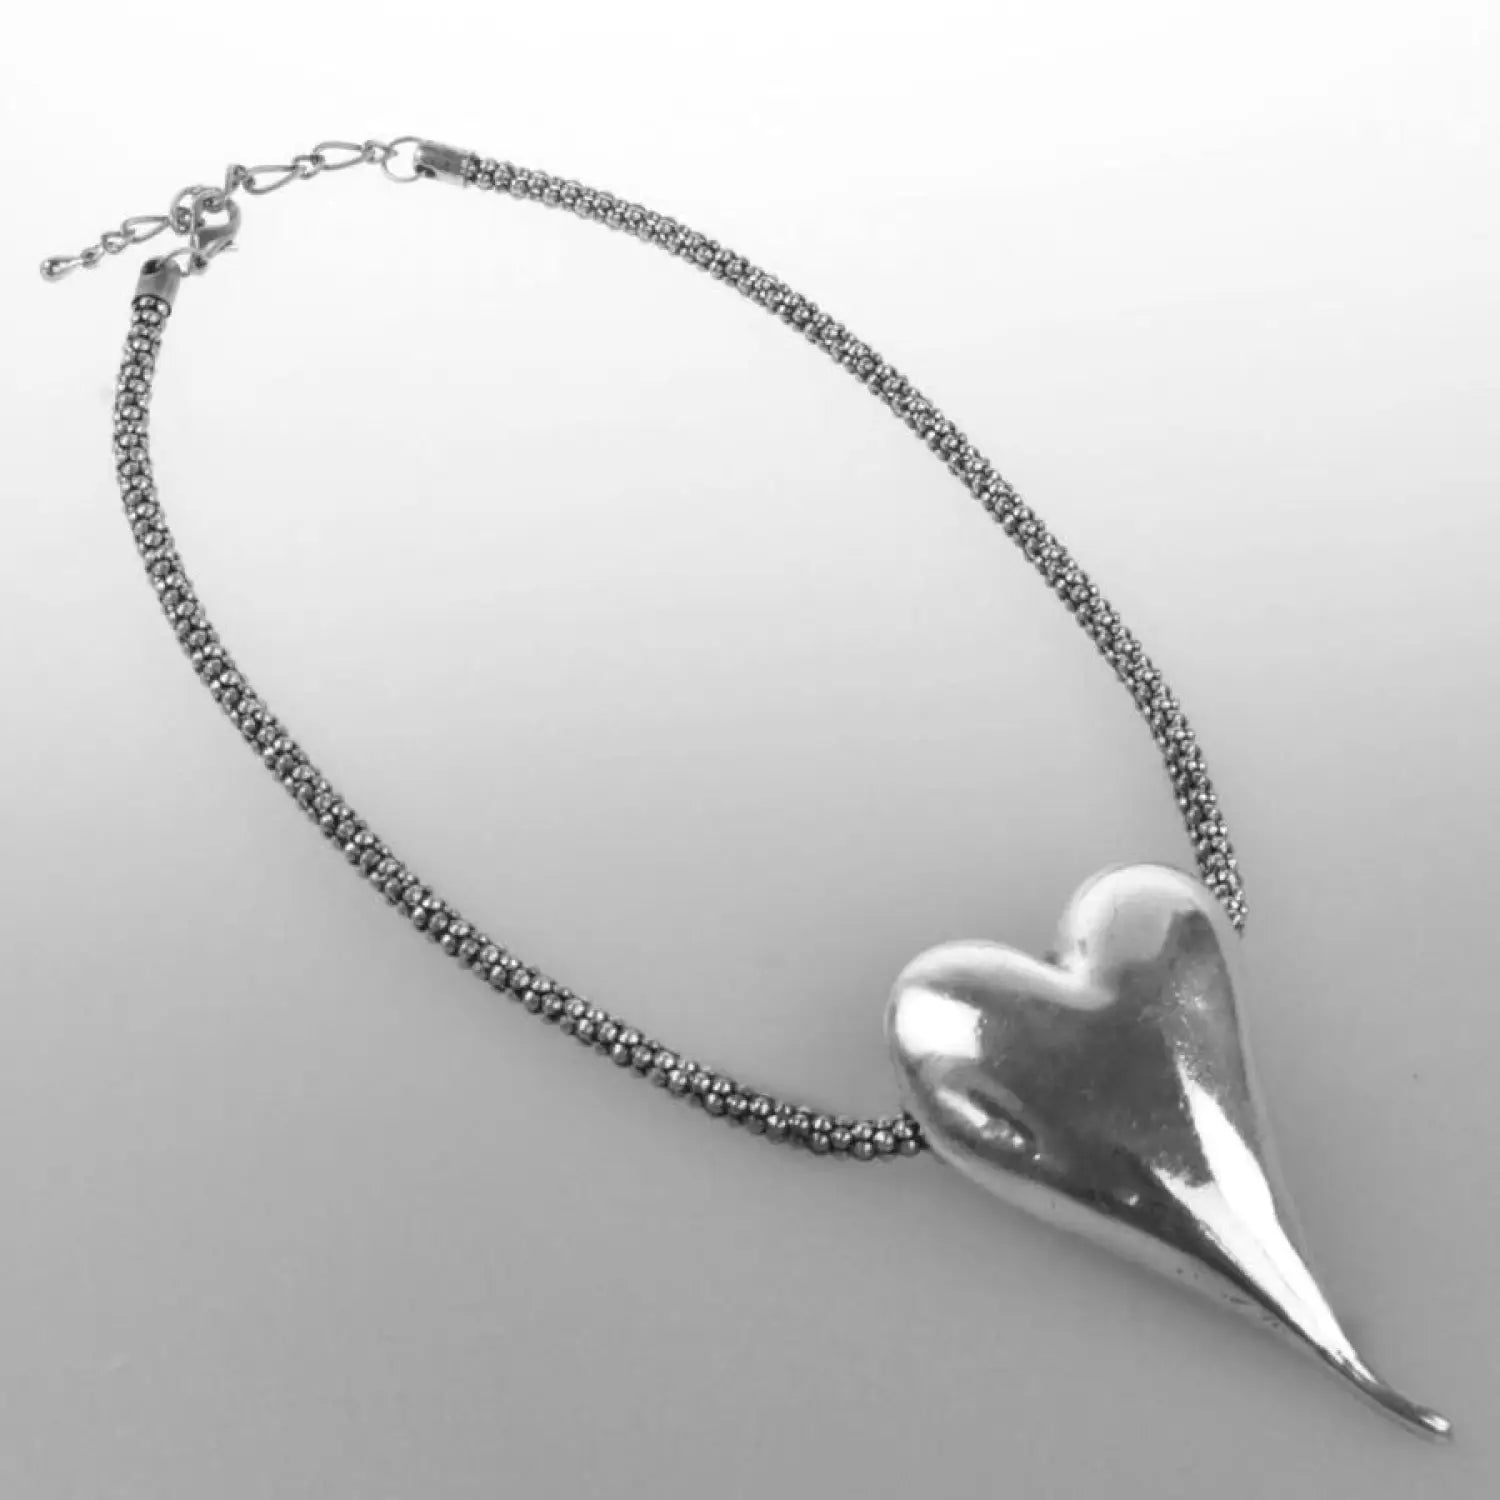 Silver heart bracelet with bead from Chunky Heart Pendant Necklace - Statement Accessory.